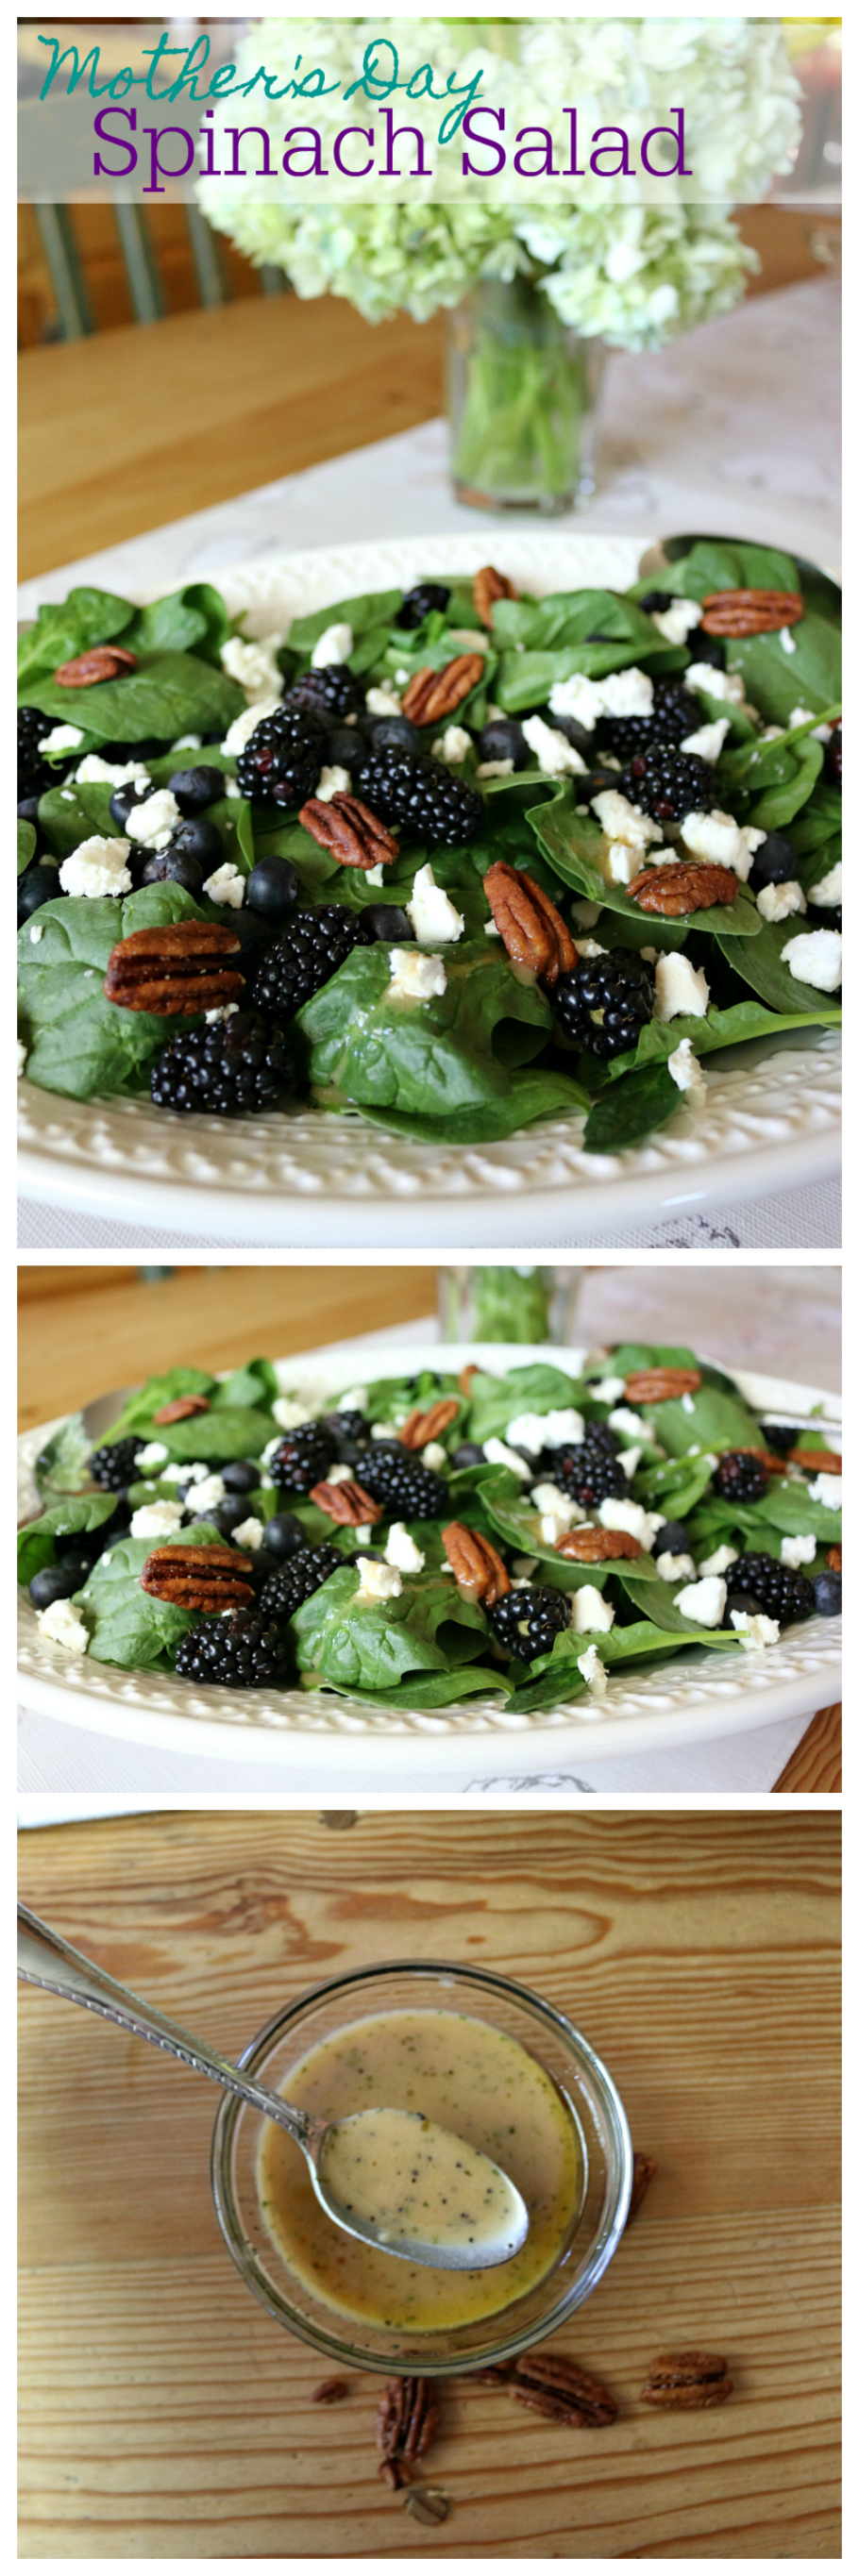 Spinach Salad with Poppy Seed Dressing CeceliasGoodStuff.com Plus 5 amazing spinach salads Mom will LOVE!